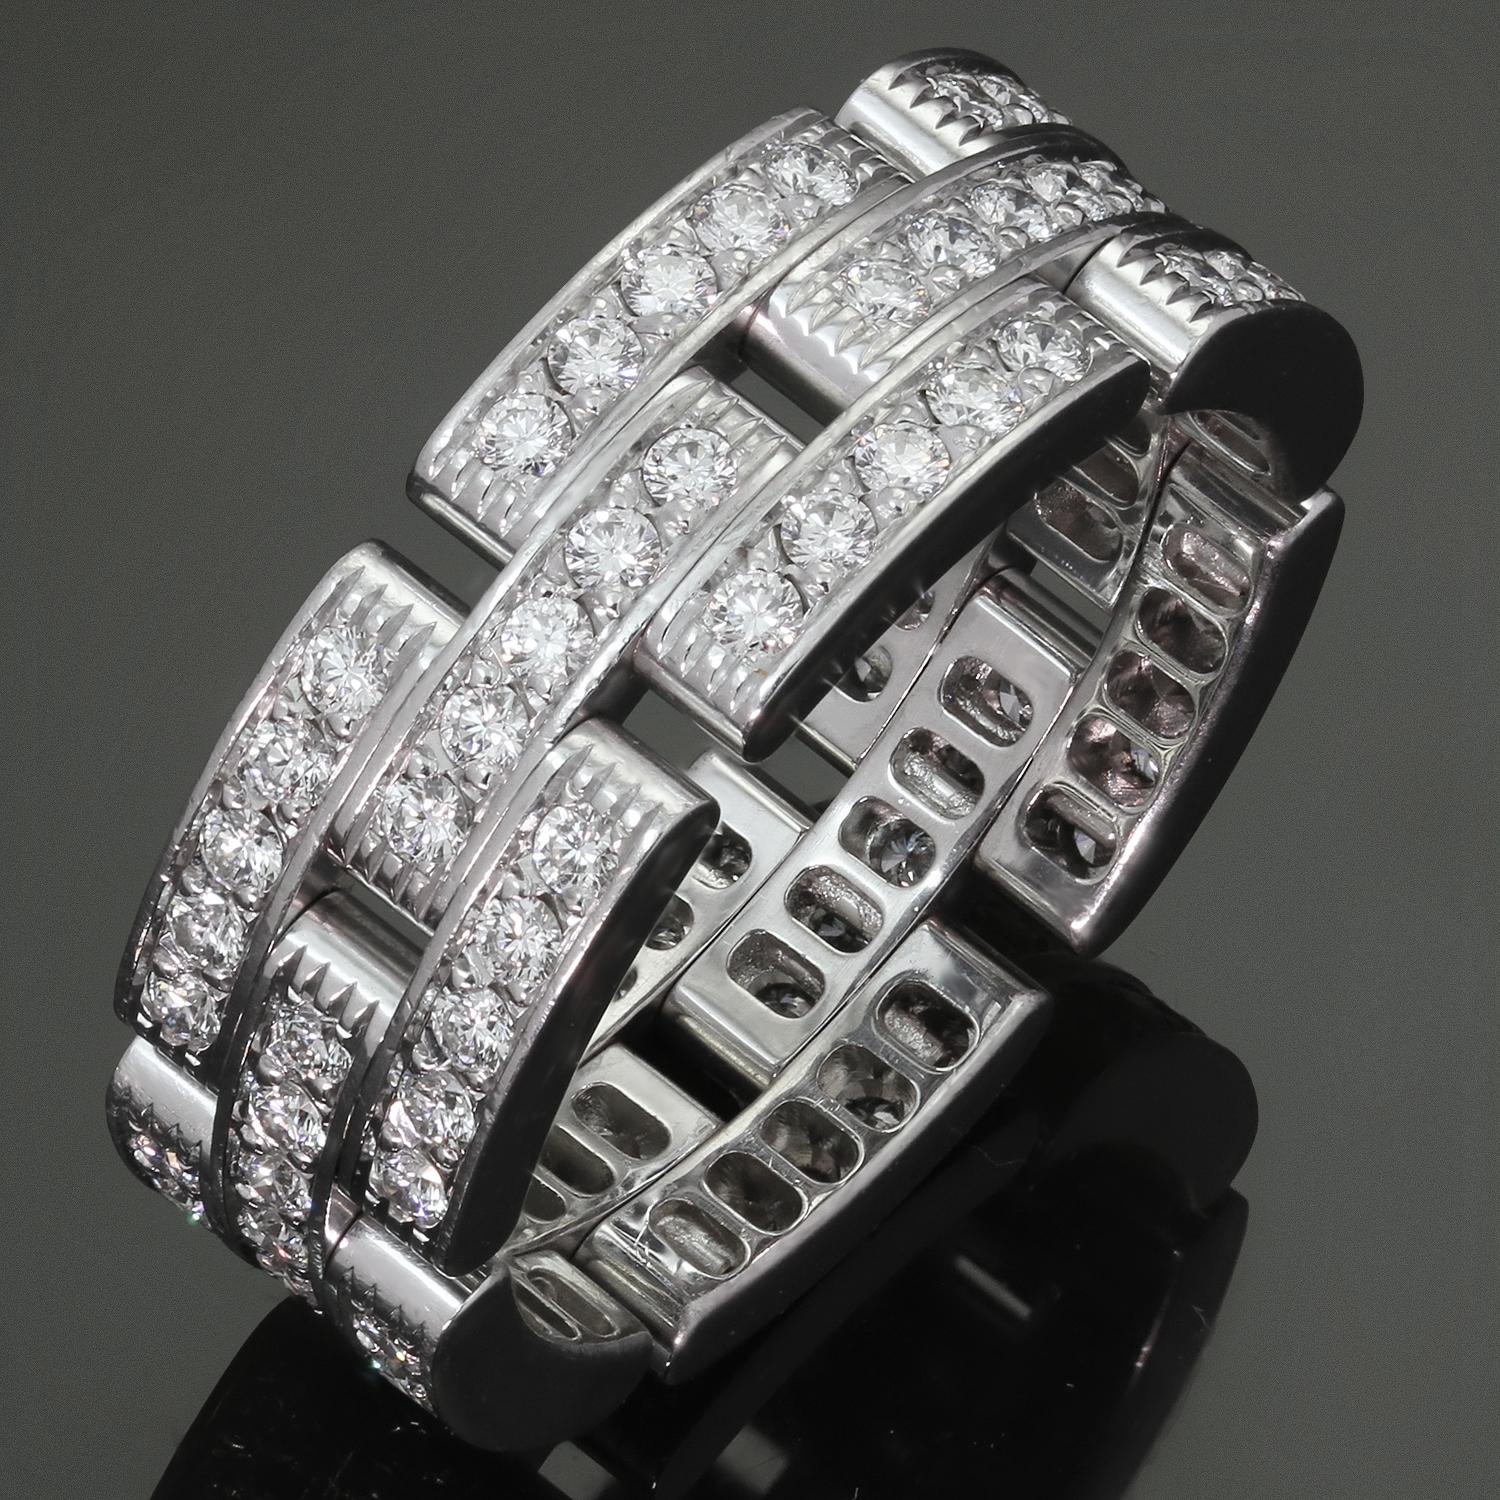 This fabulous authentic Cartier 3-row band from the iconic Maillon Panthère collection is crafted in 18k white gold and set with 90 brilliant-cut D-E-F VVS1-VVS2 diamonds weighing an estimated 1.40 carats. Made in France circa 2008. The ring size is